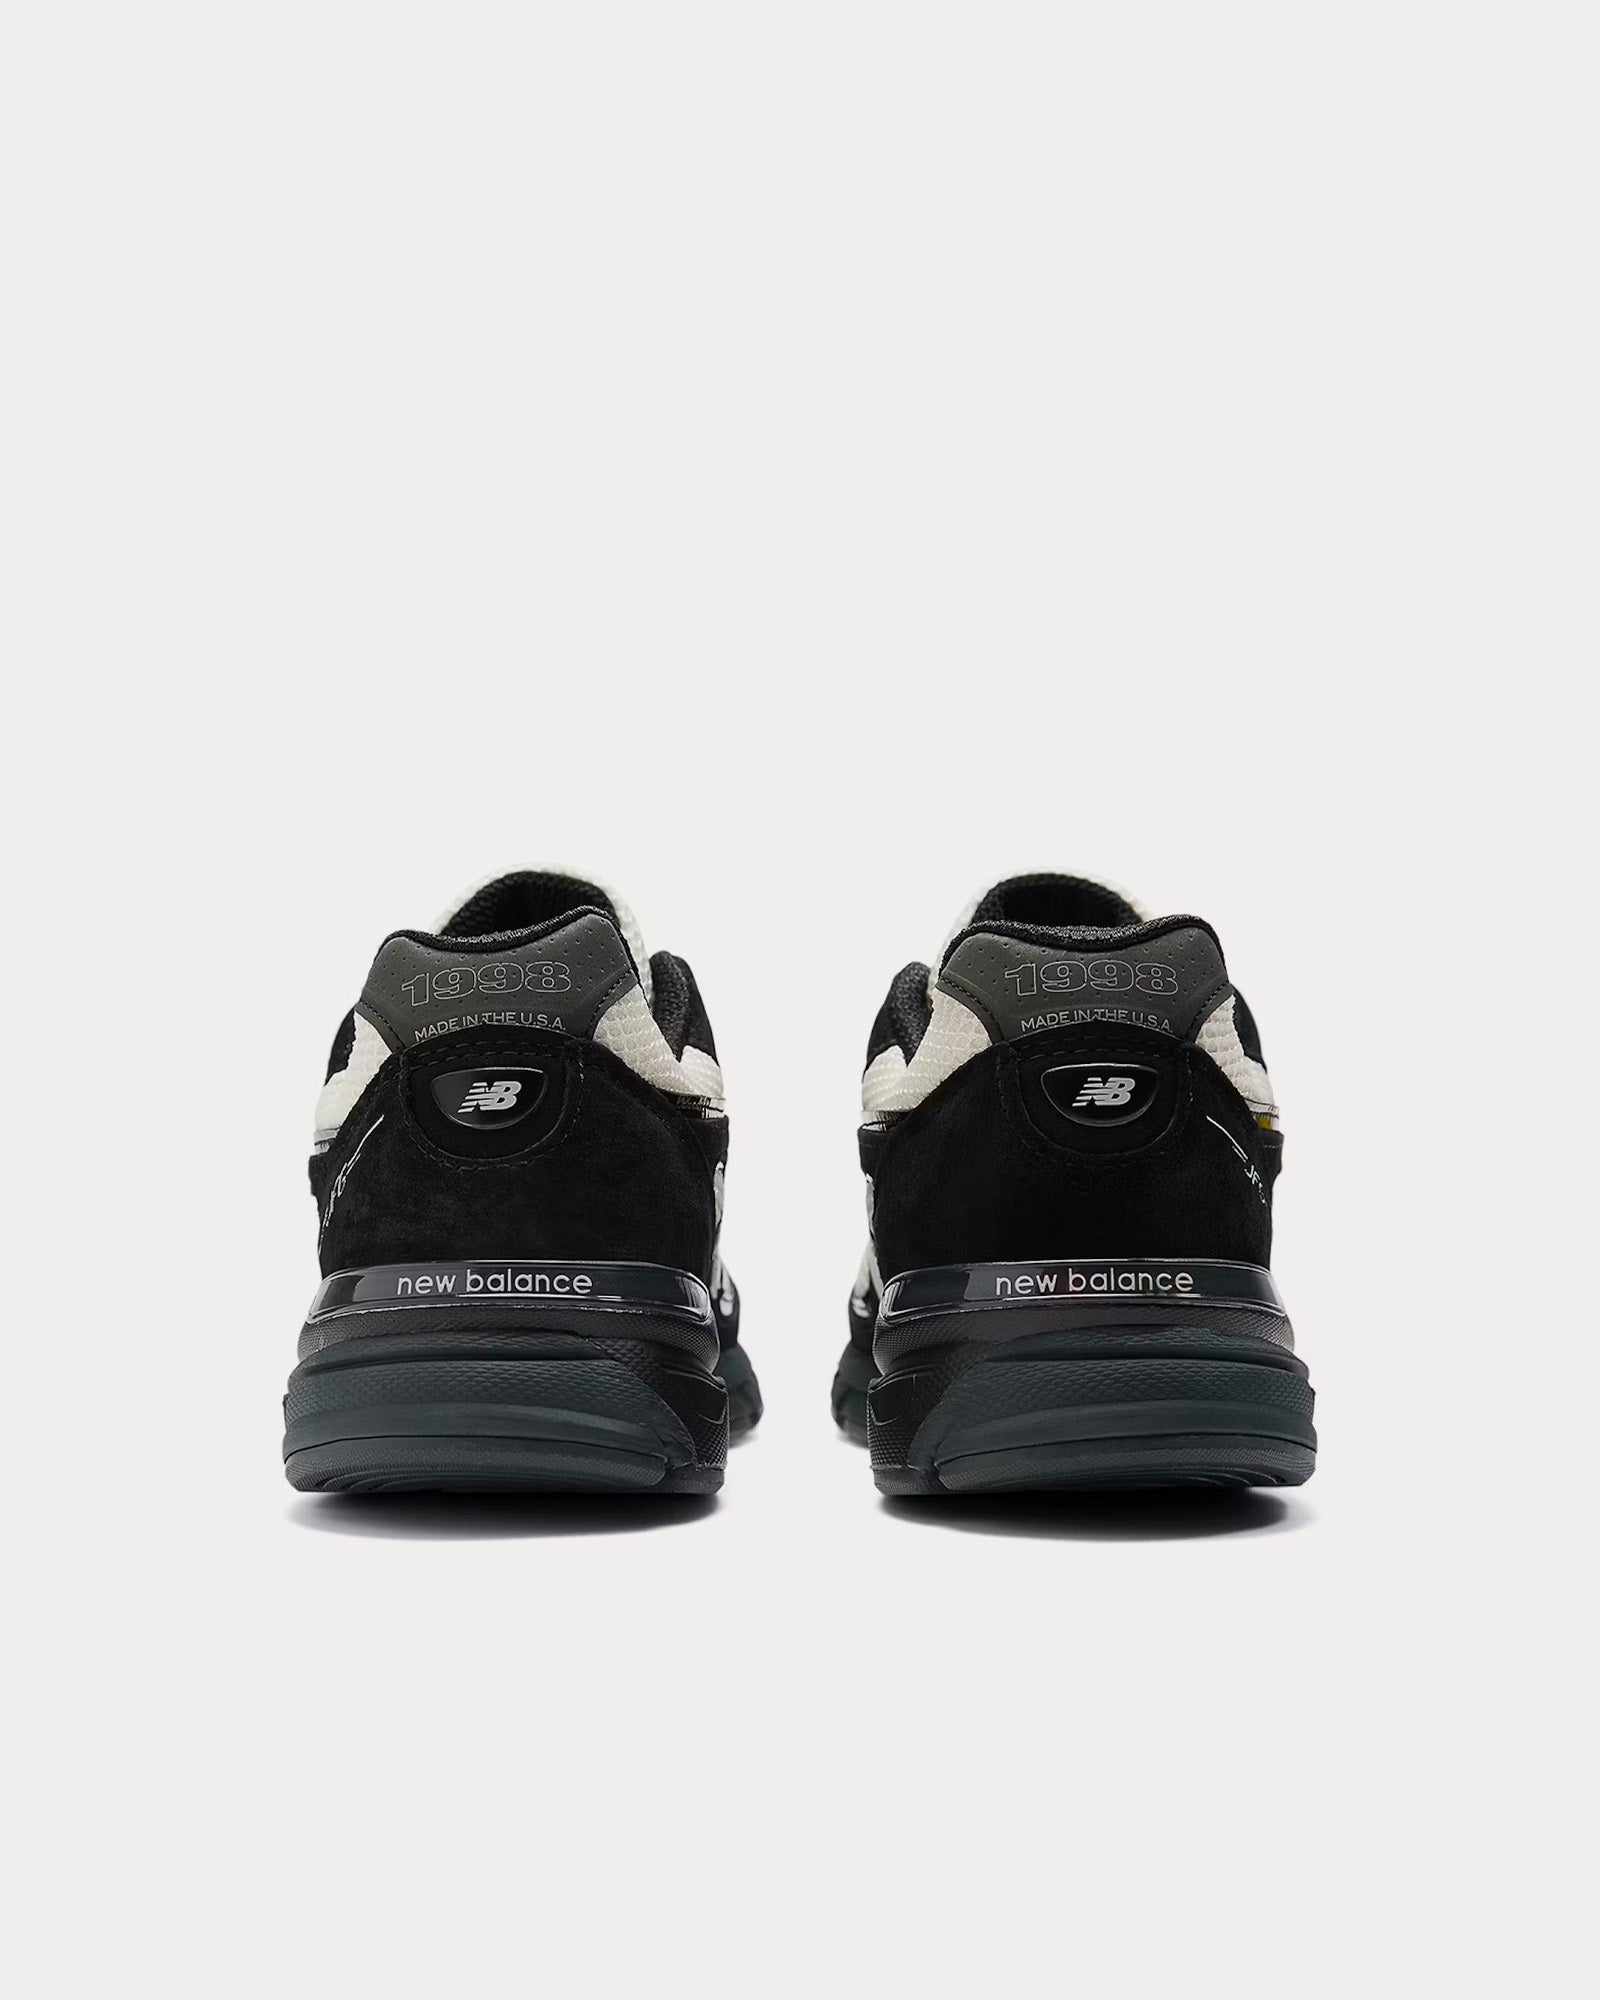 New Balance x Joe Freshgoods - Made in USA 990v4 'Outro' Black / White Low Top Sneakers